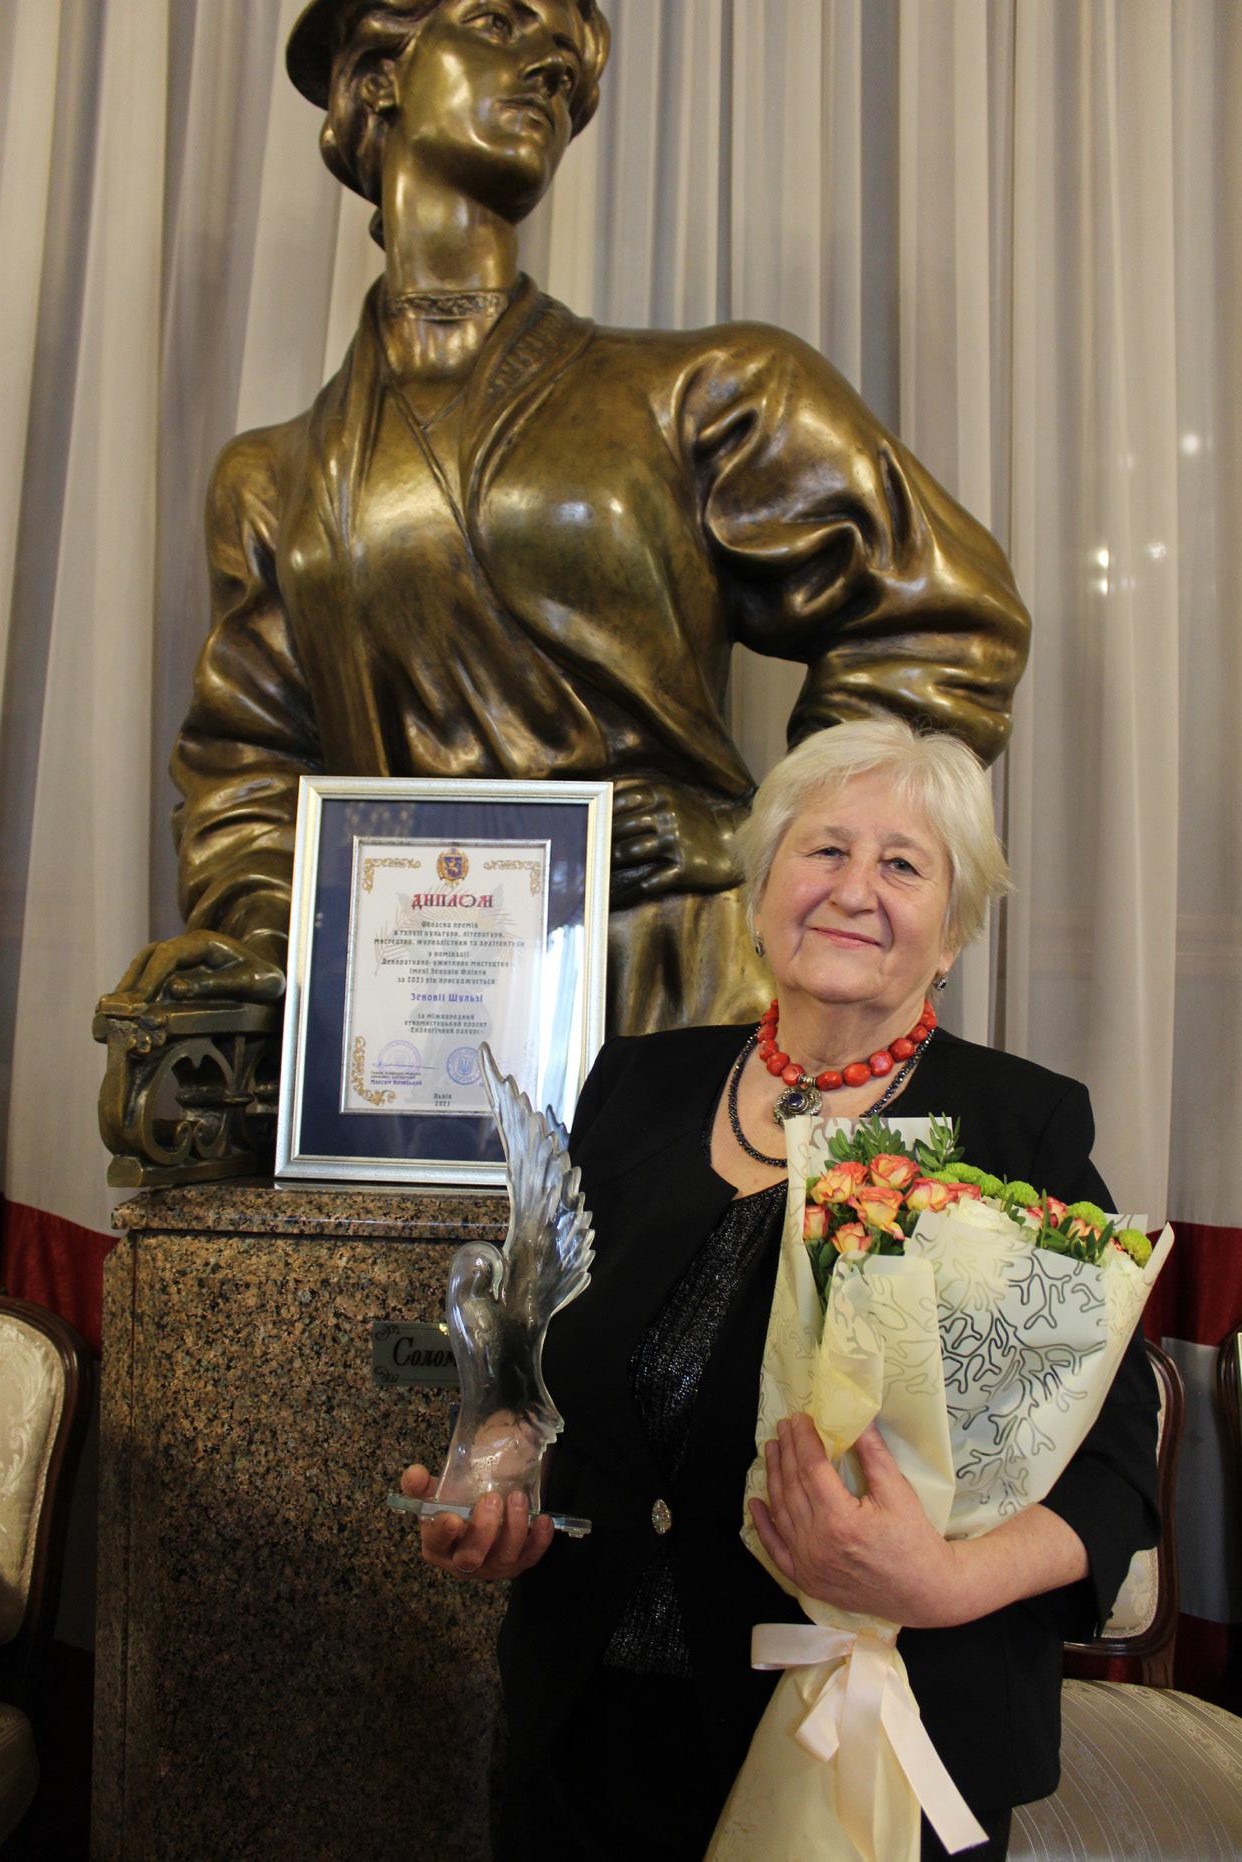 Awardee of the regional prize in the field of culture named after Zenovii Flinta, 2021 